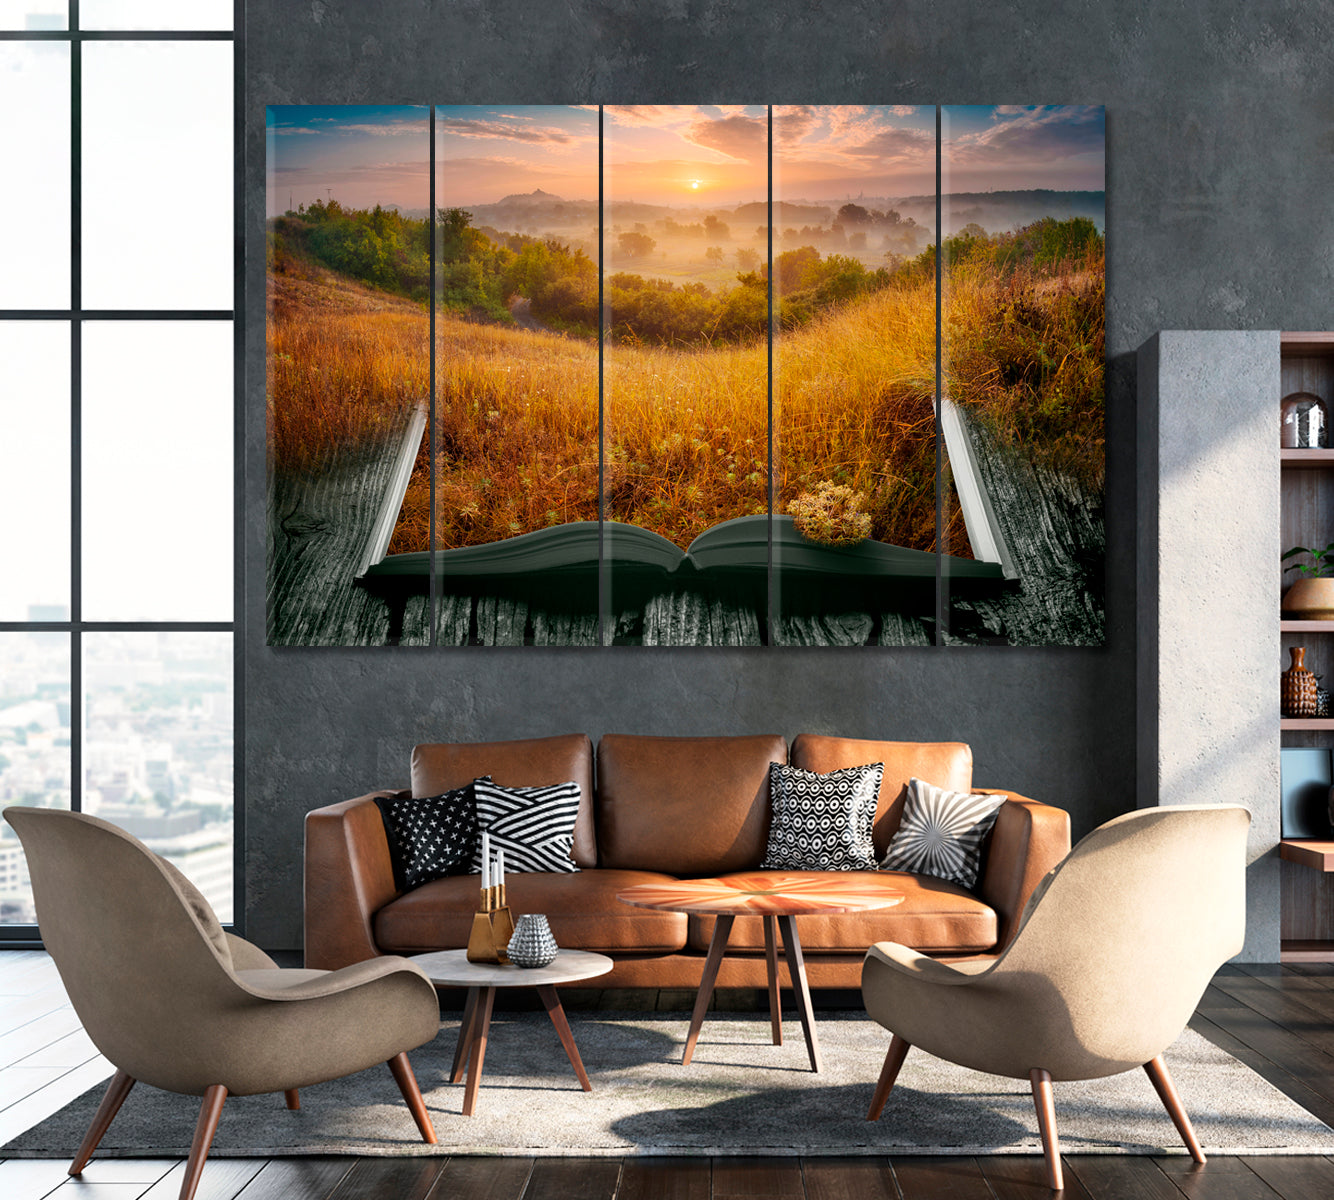 Summer Misty Valley on Pages of Magical Book Canvas Print ArtLexy 5 Panels 36"x24" inches 